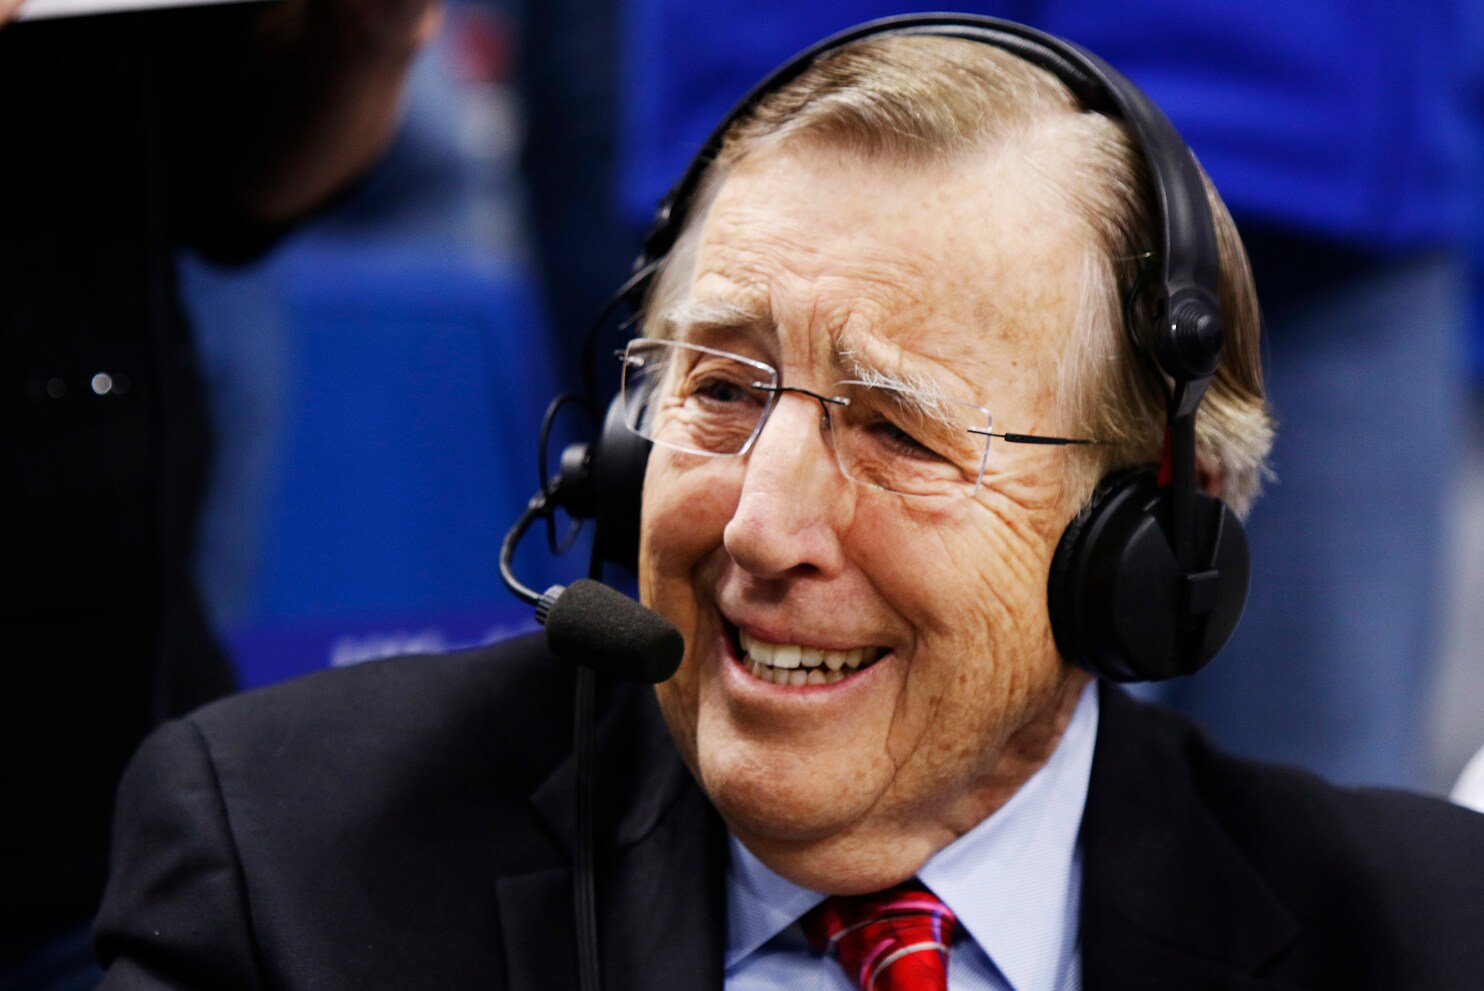 Brent Musburger used to make veiled gambling references. Now he’s